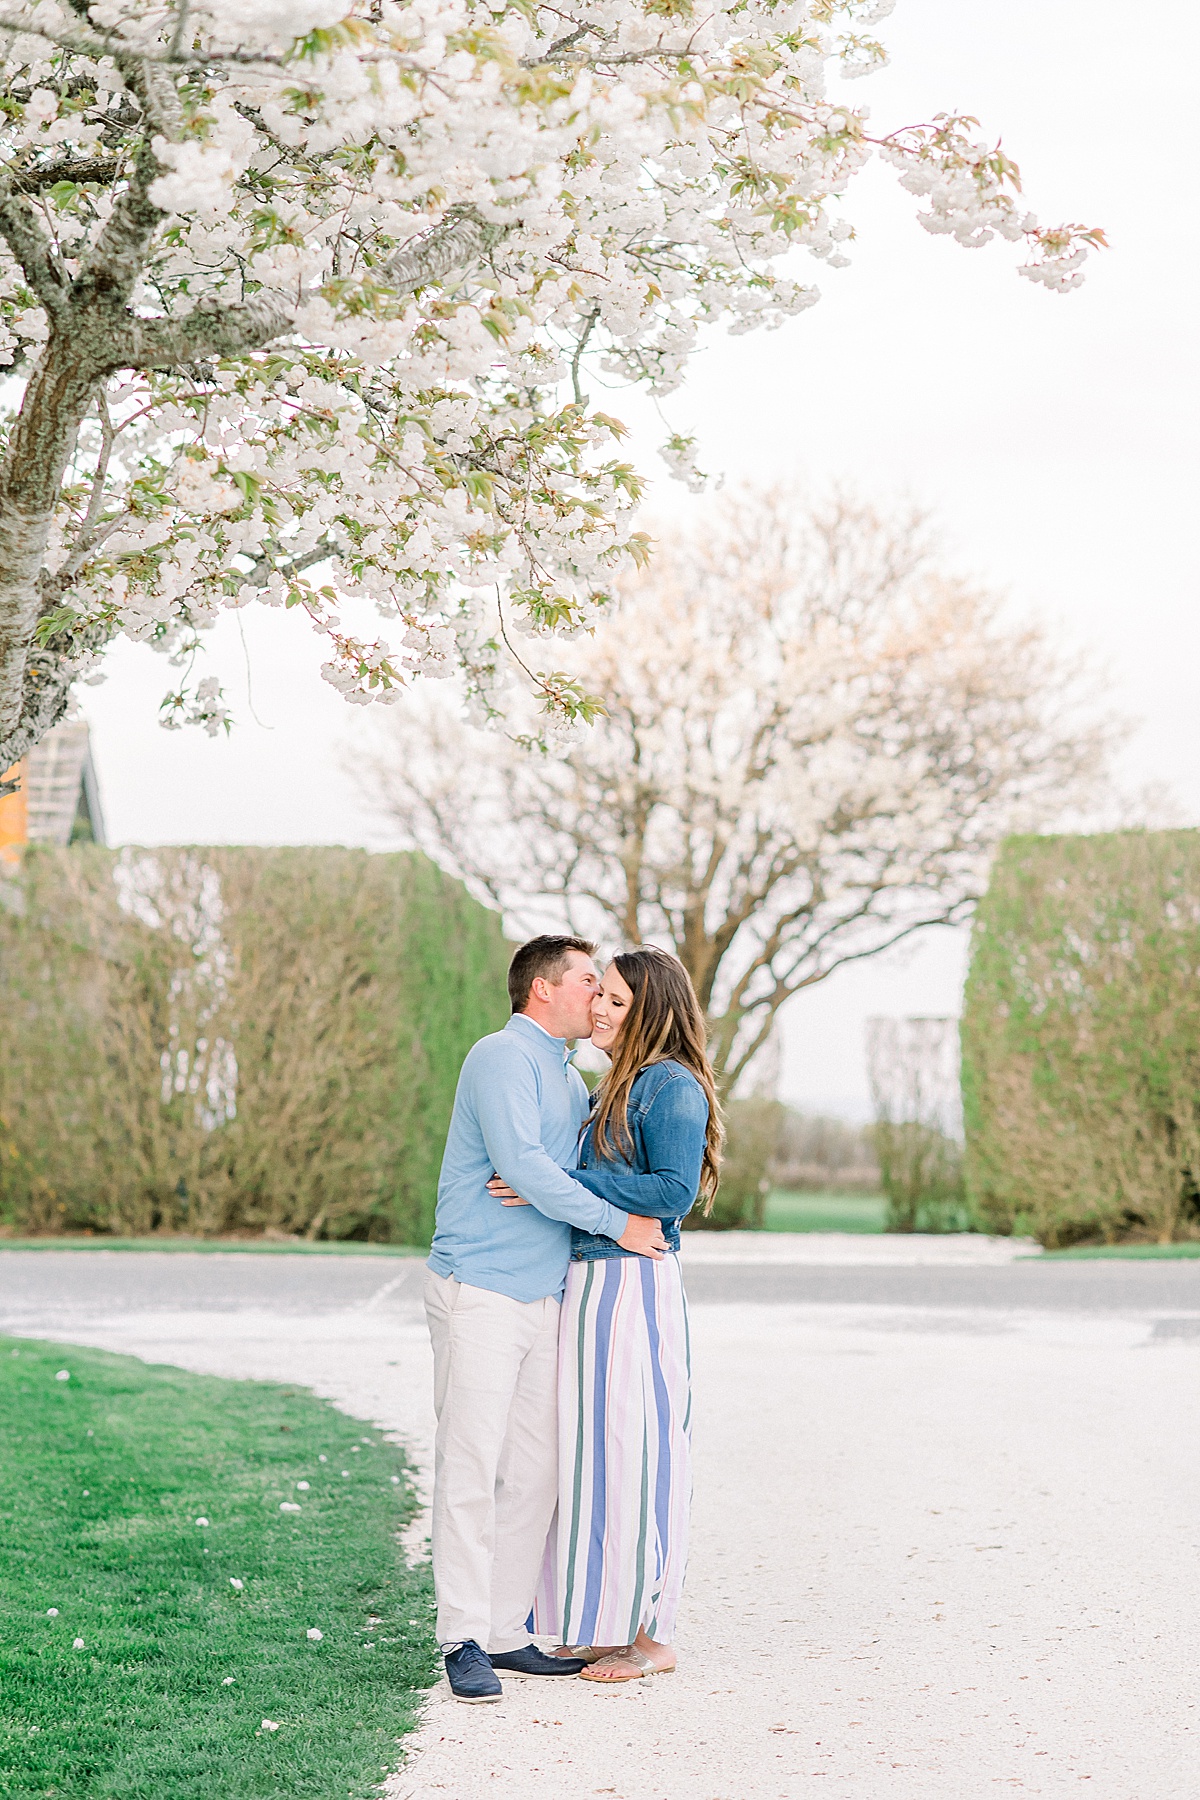 Sconset Nantucket Spring Engagement Photos by the Cherry Blossoms